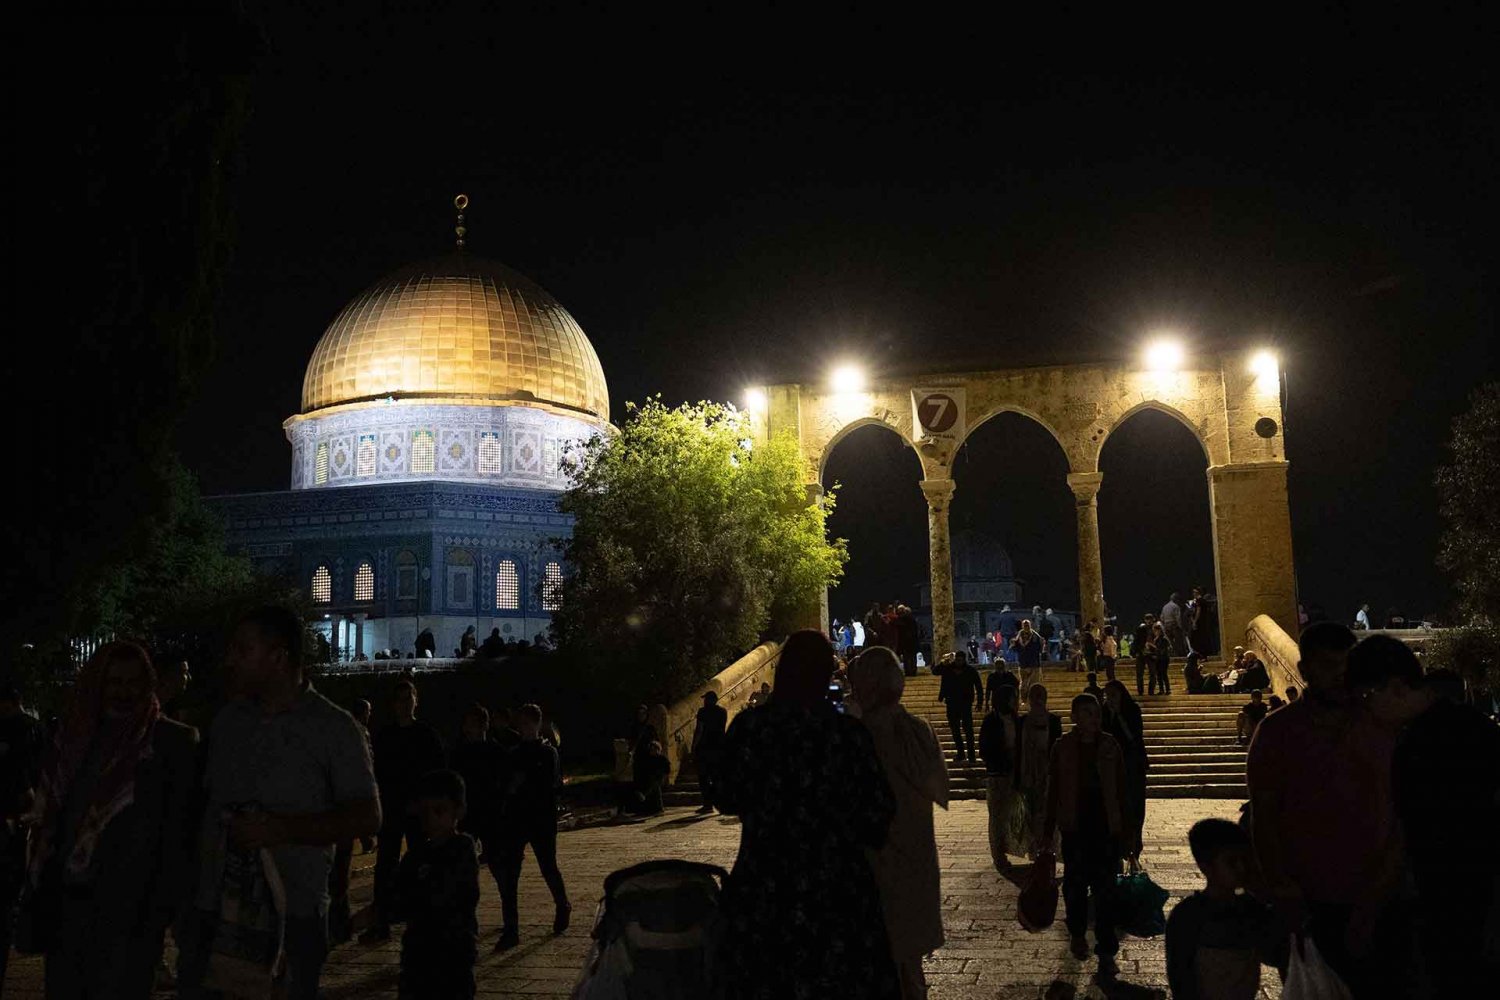 Muslim worshippers find community on the grounds of al-Aqsa Mosque on a night during Ramadan, April 2022.